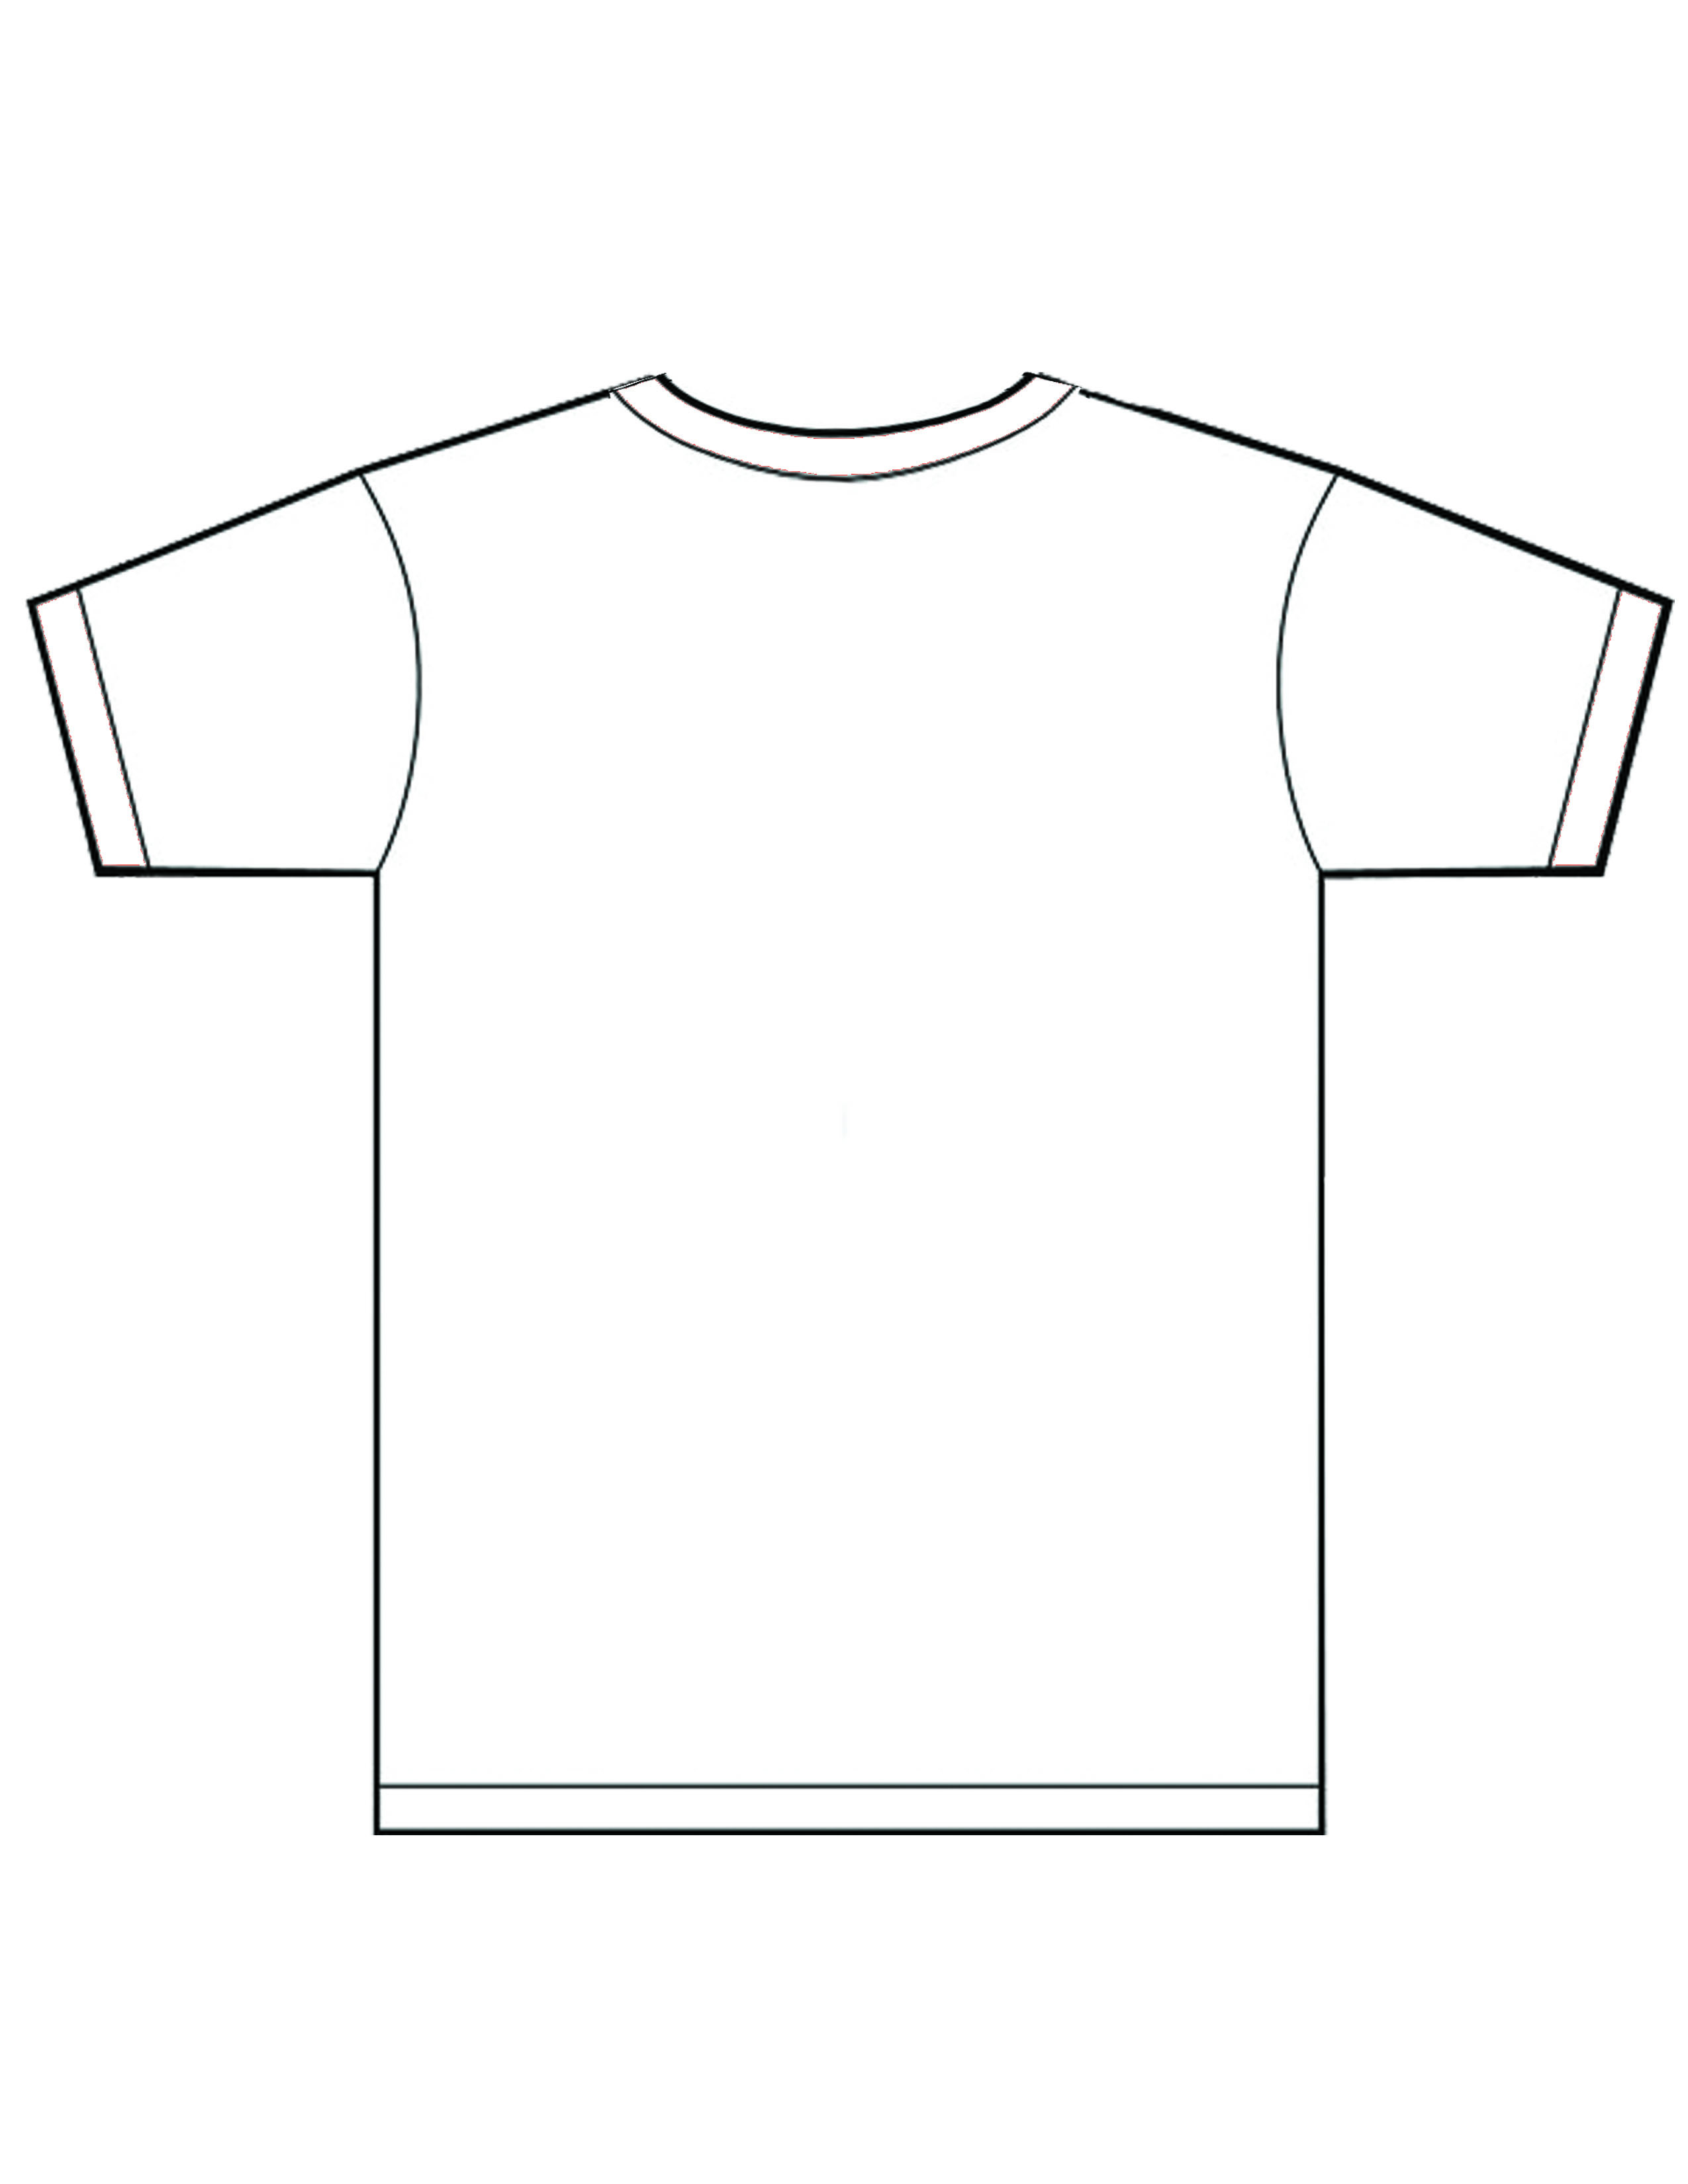 20 T-Shirt Template Front And Back Images - T-Shirt Template Back With Regard To Blank Tshirt Template Pdf